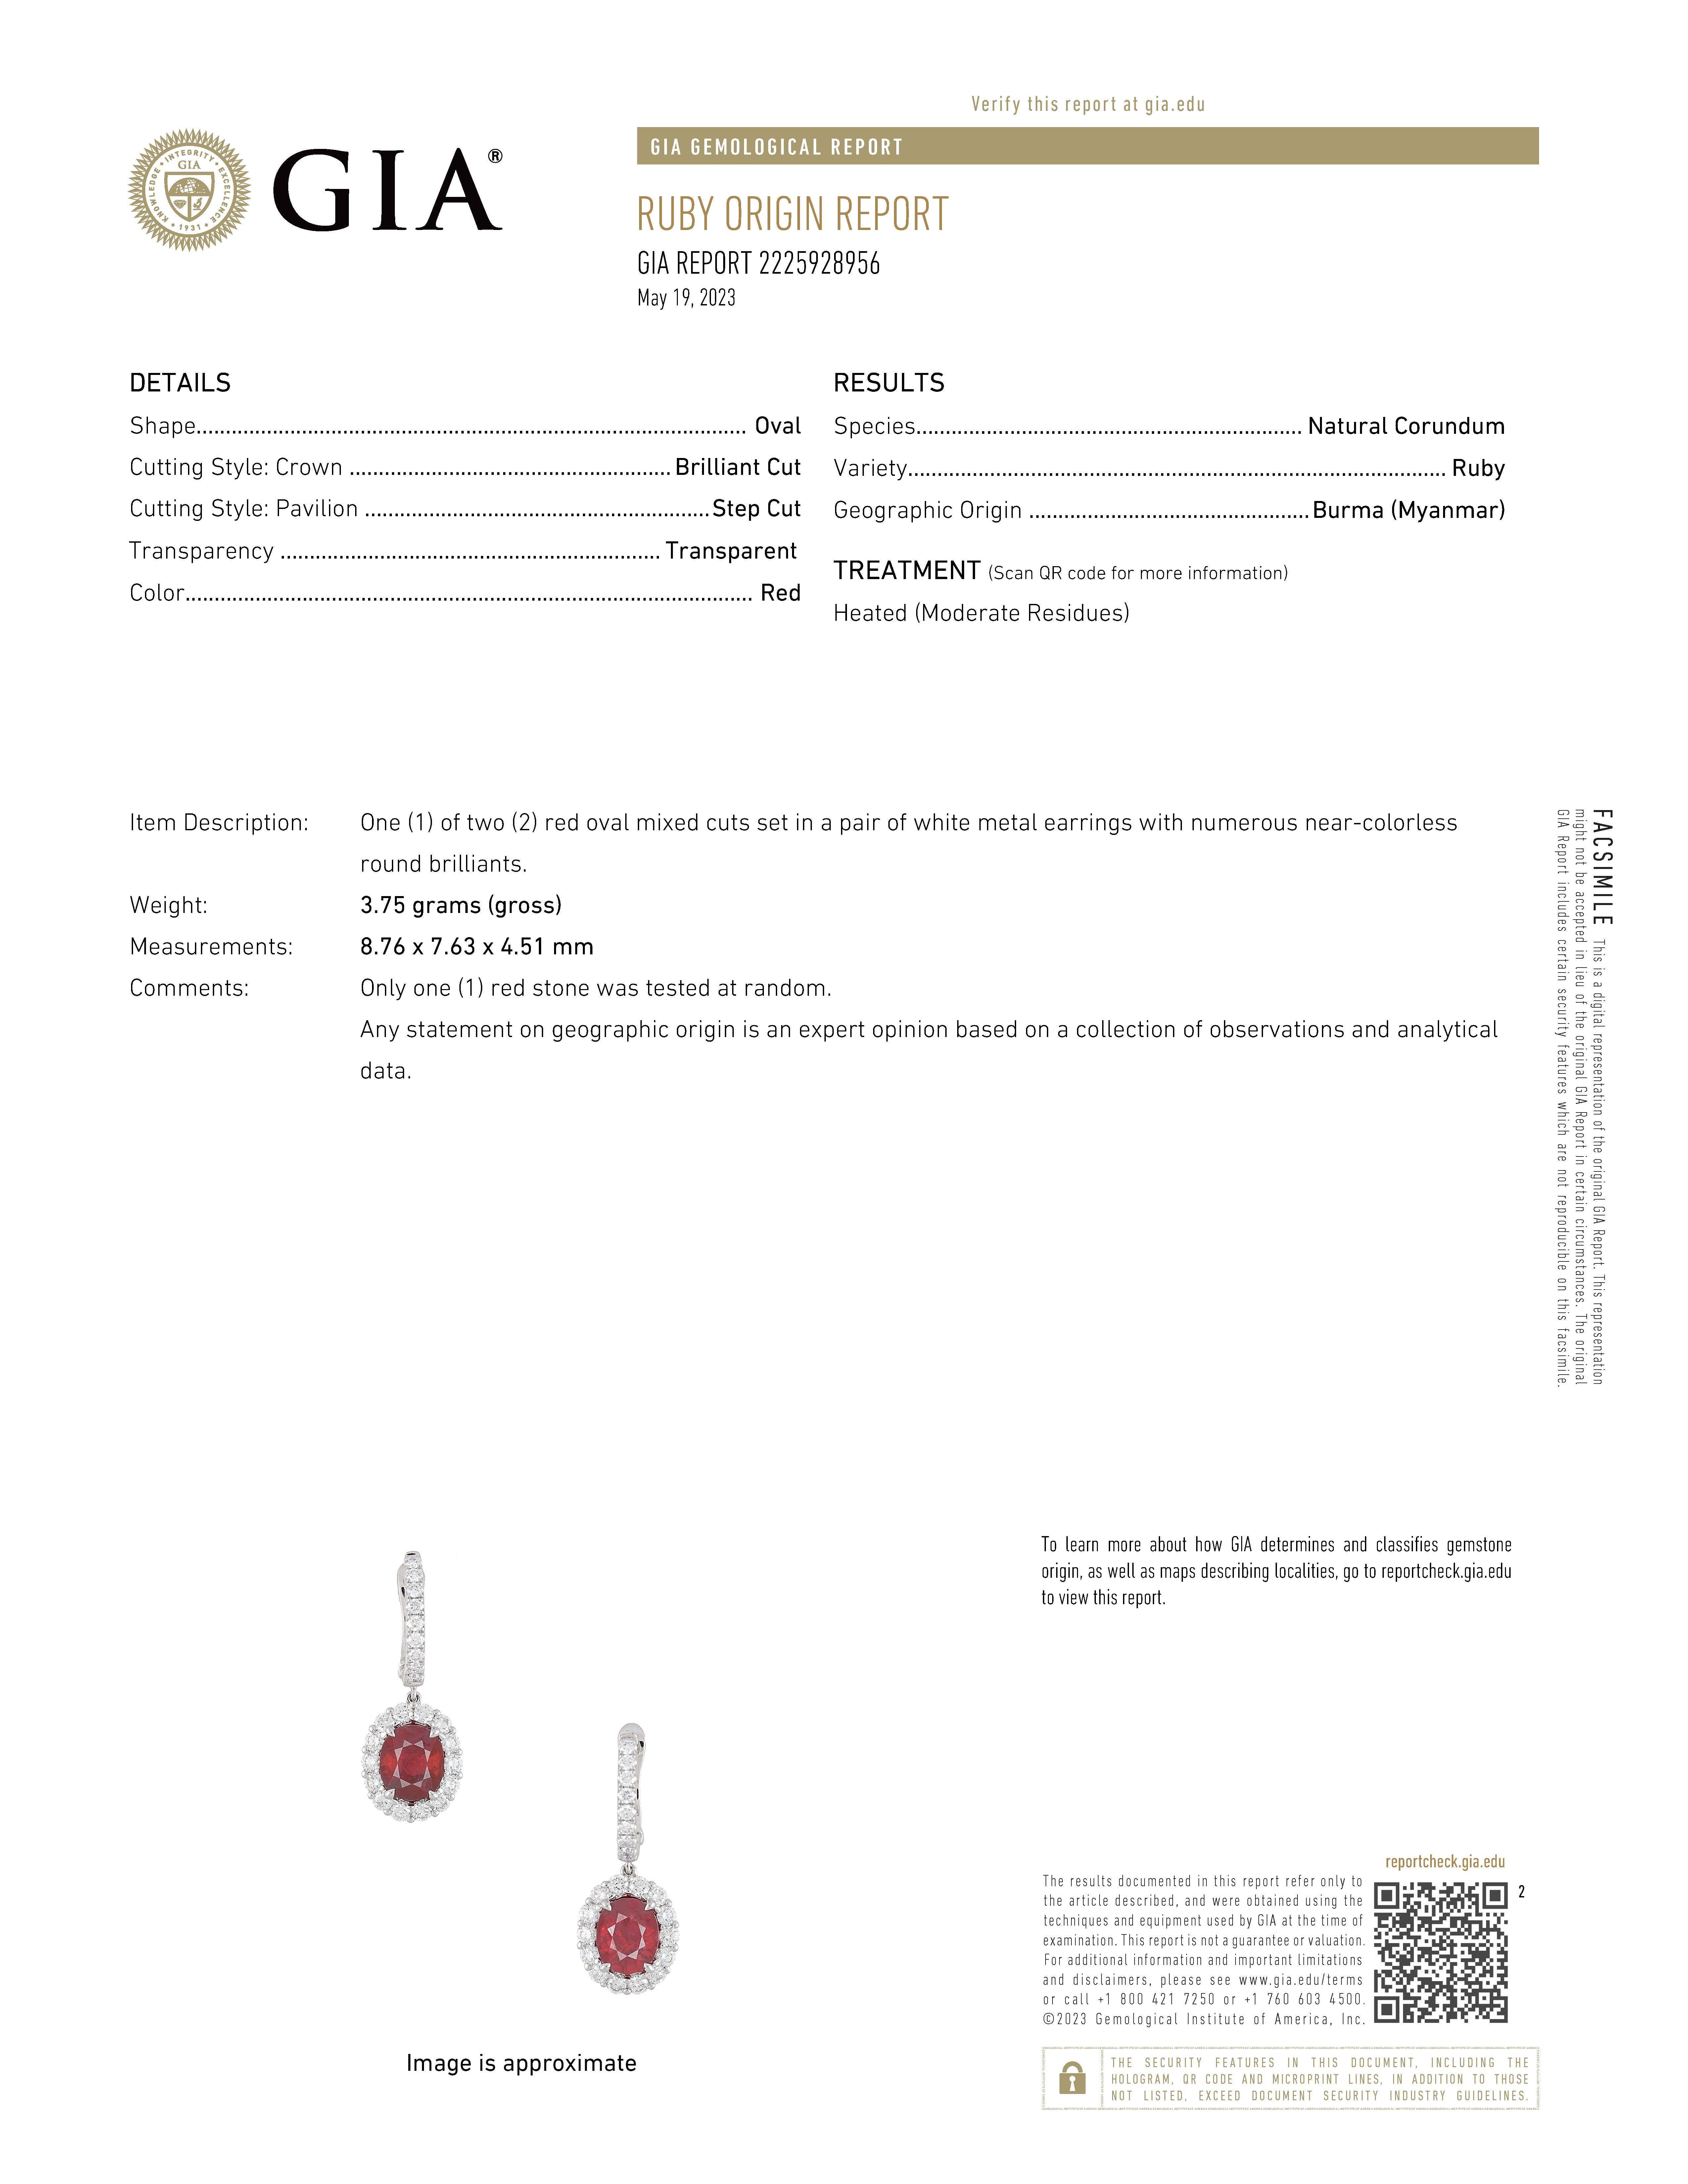 Sensational ruby and diamond drop earrings. Very clean rubies with superb vivid red color. Created by Alexander Beverly Hills.
6.81 carats total metal weight. 
2 GIA certified oval Burma rubies, 4.91 carats total. Complimented by 46 round brilliant